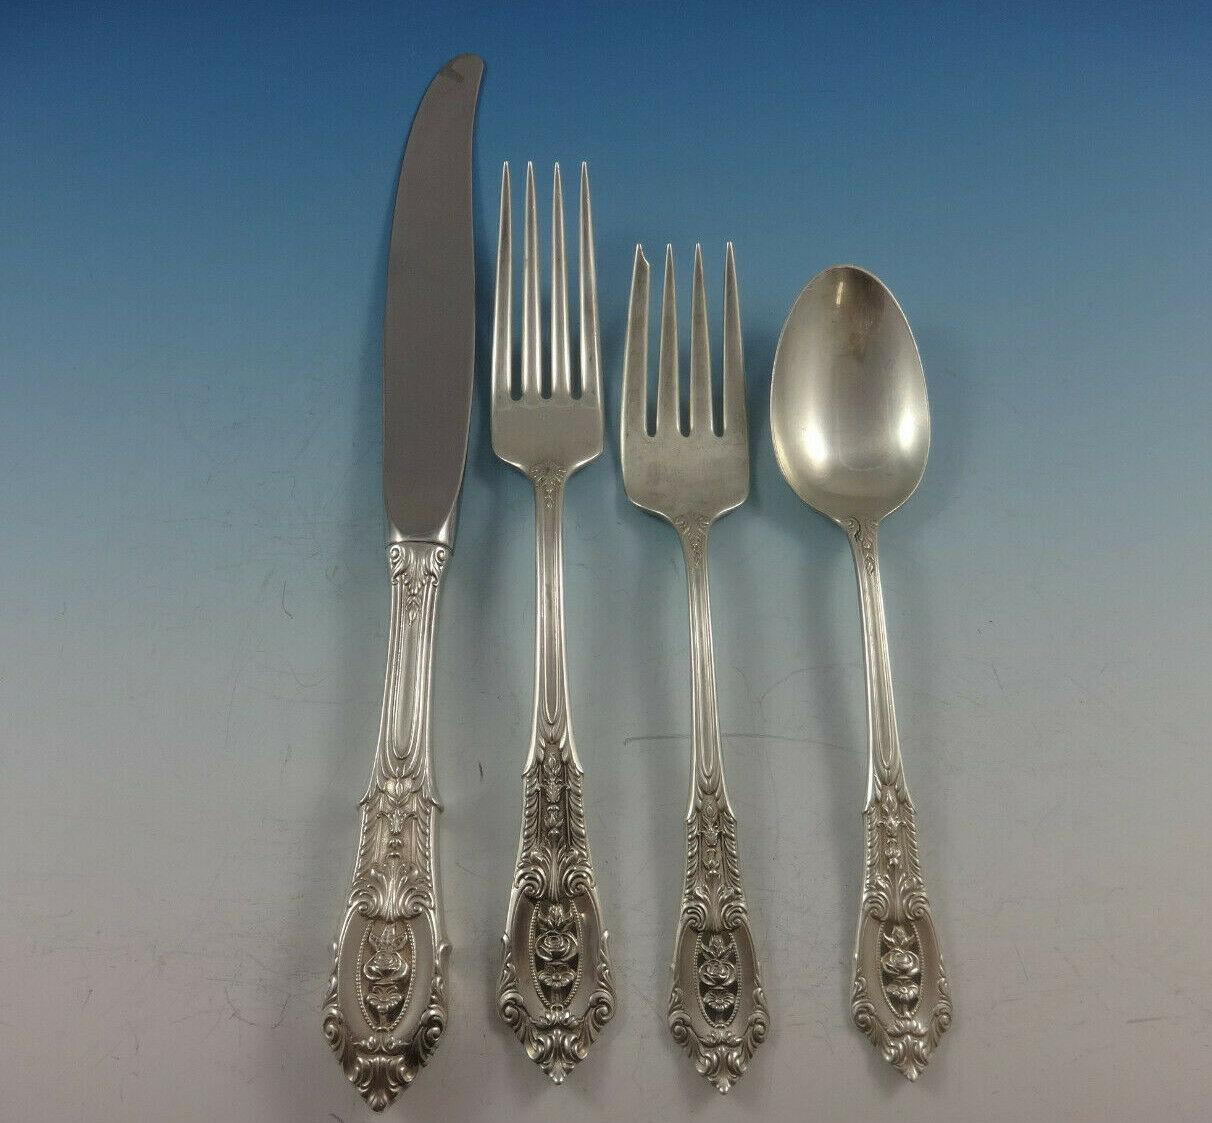 Rose Point by Wallace sterling silver dinner and luncheon flatware set, 71 pieces. This set includes:

8 dinner size knives, 9 3/4